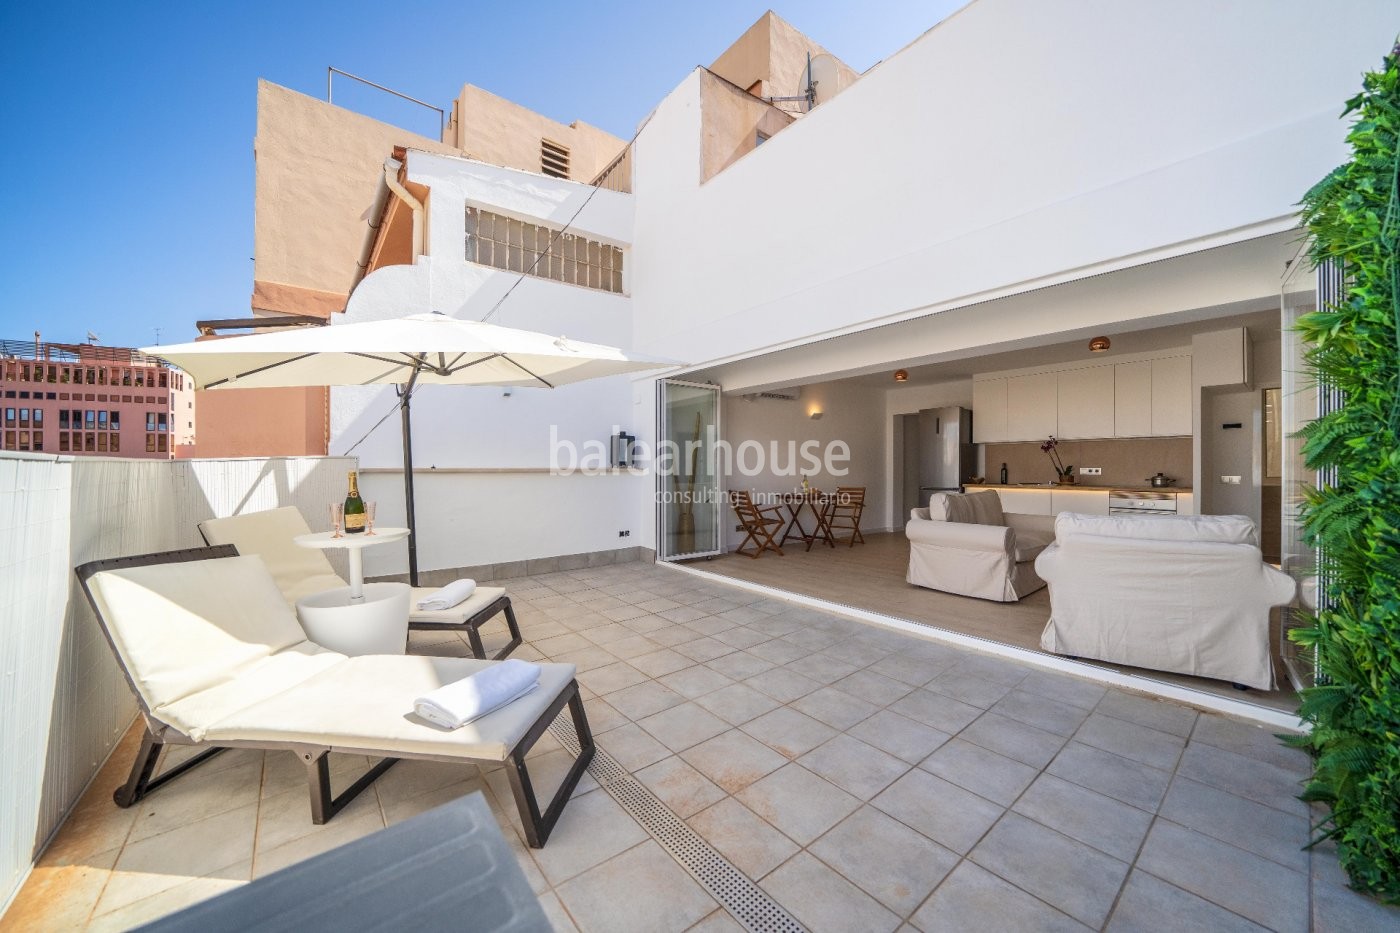 Excellent penthouse in the centre of Palma with a large terrace and light-filled interiors.